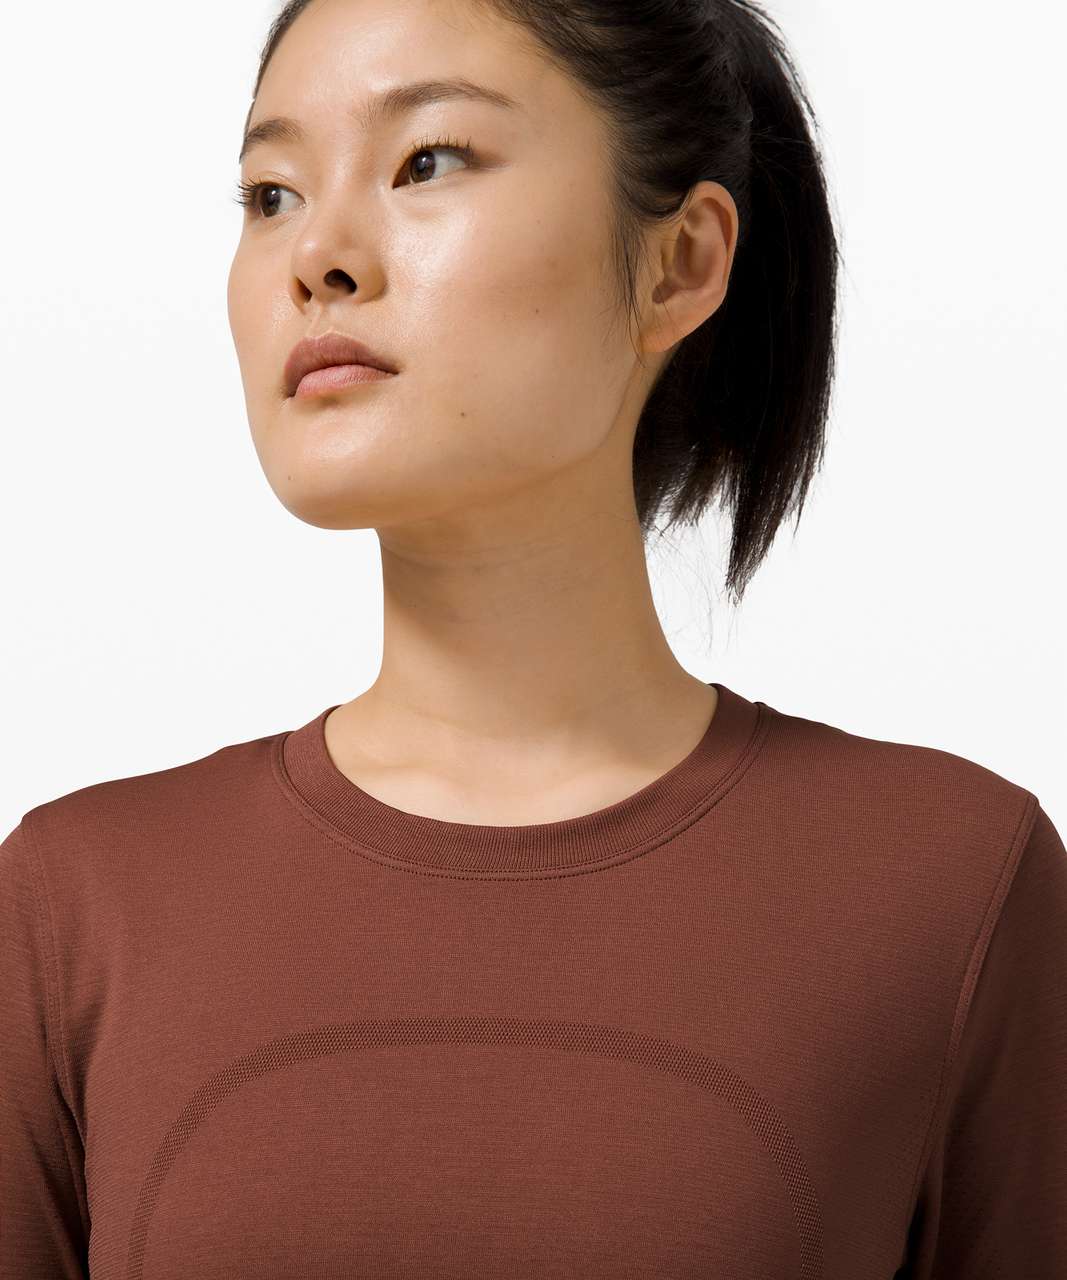 Lululemon Swiftly Breathe Long Sleeve - Ancient Copper / Ancient Copper